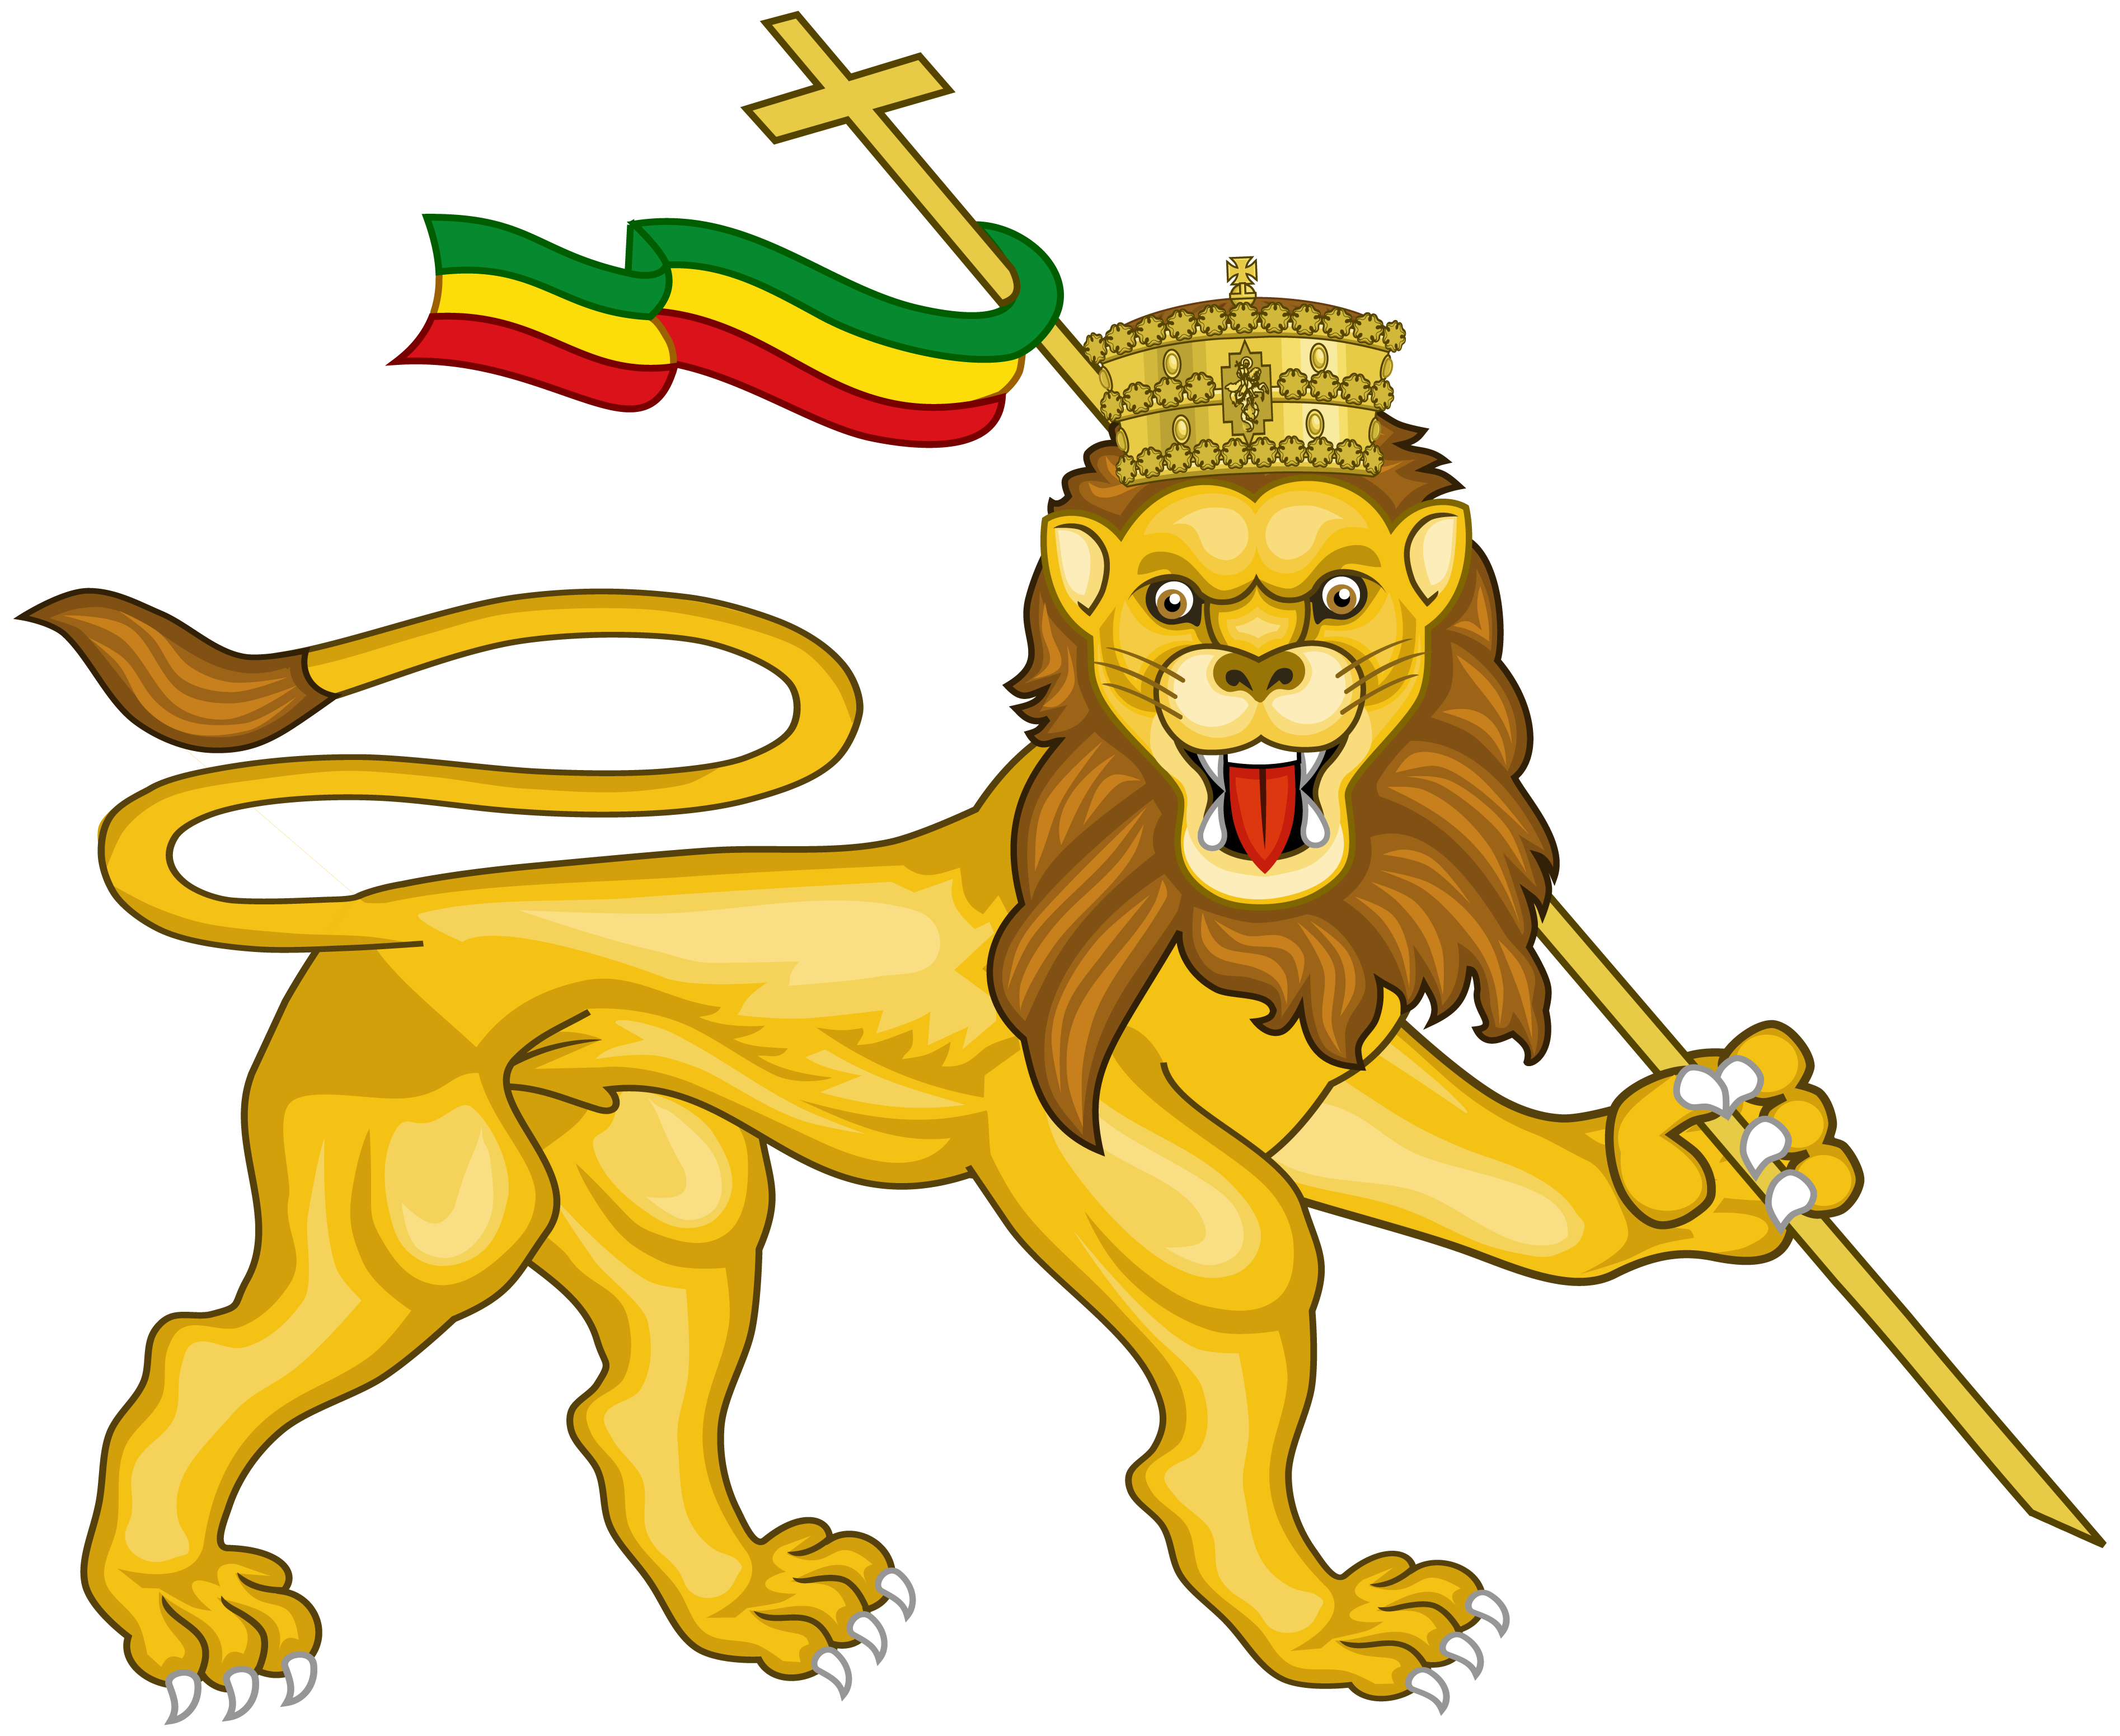 Haile Selassie and the Lion of Judah